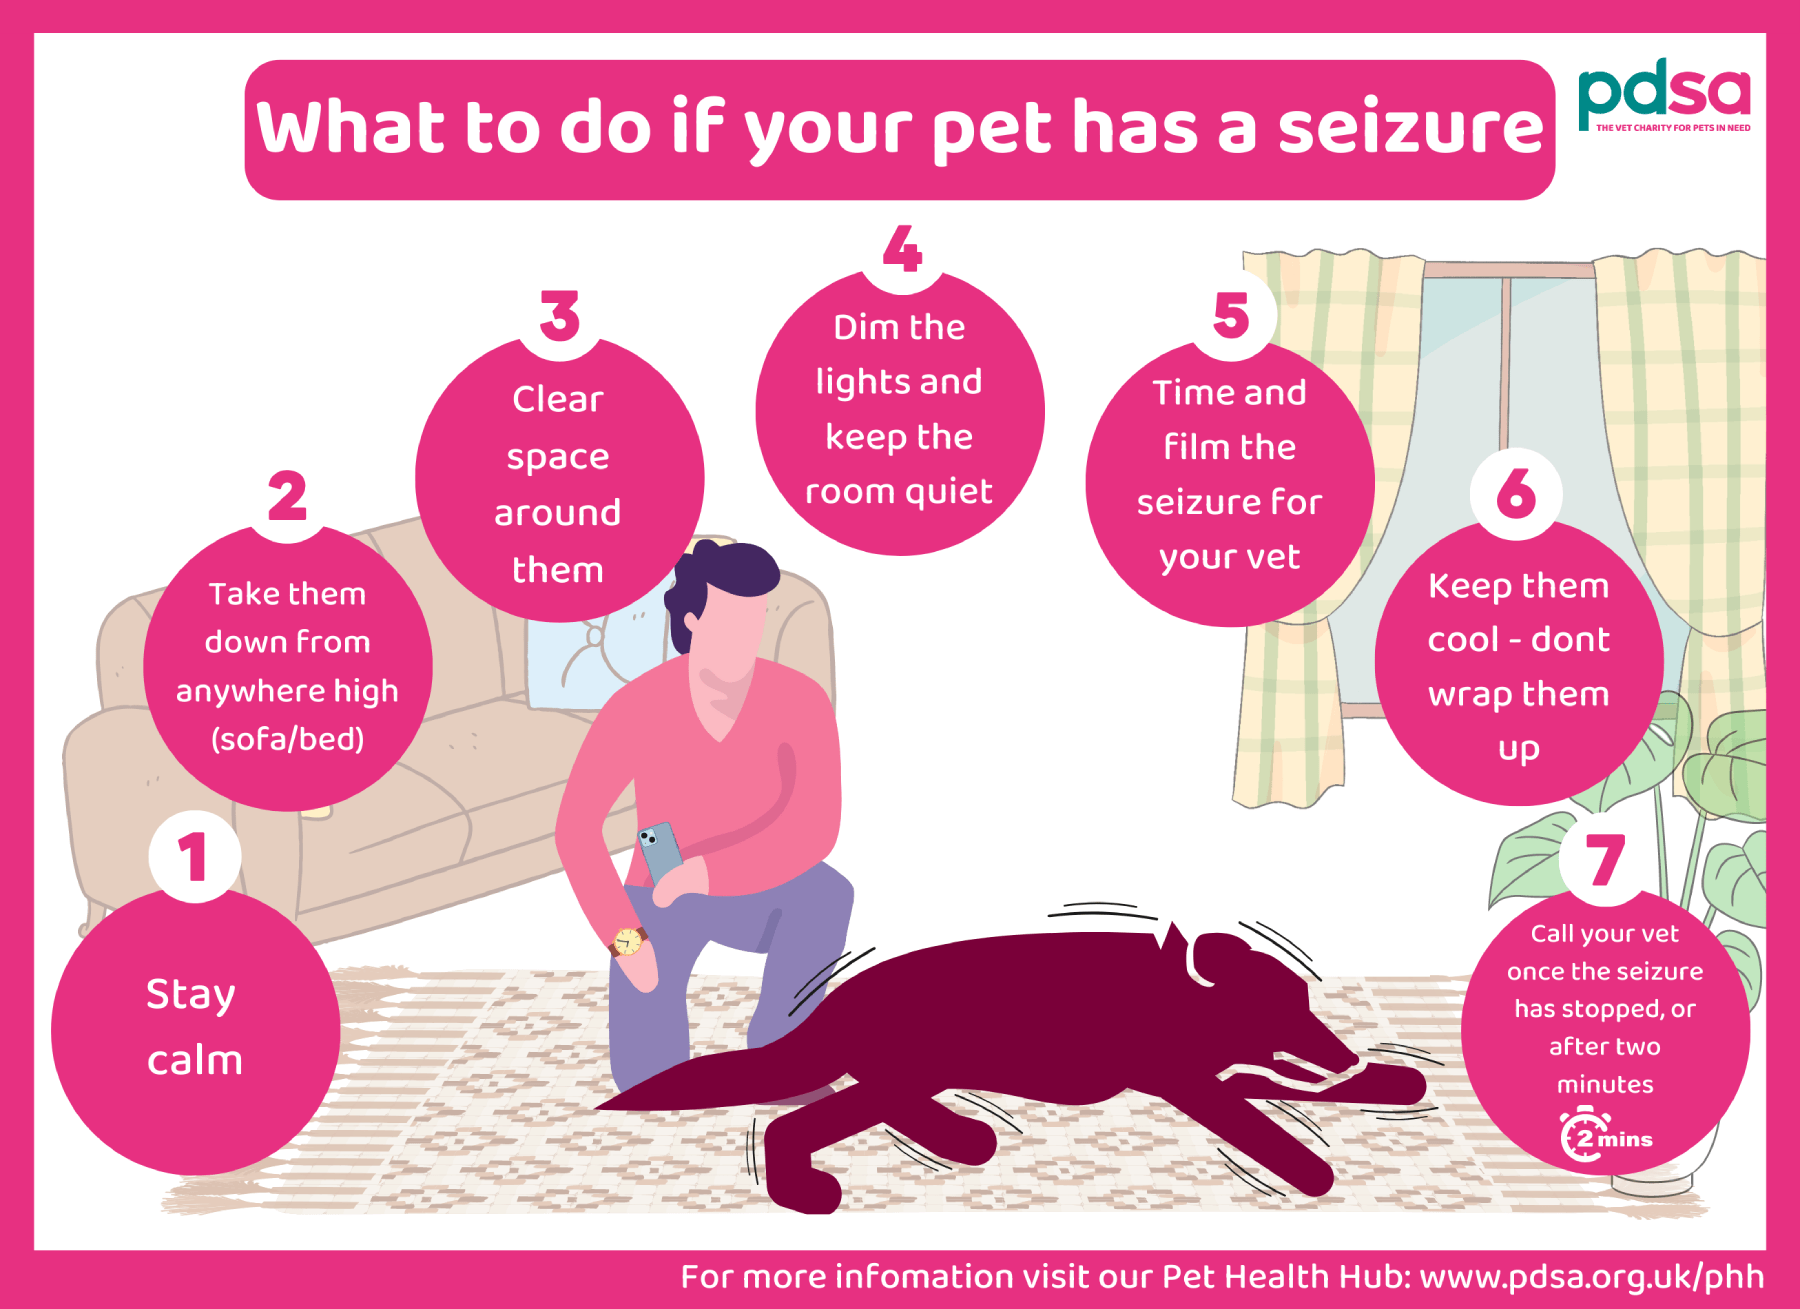 What to do if your pet has a seizure - PDSA